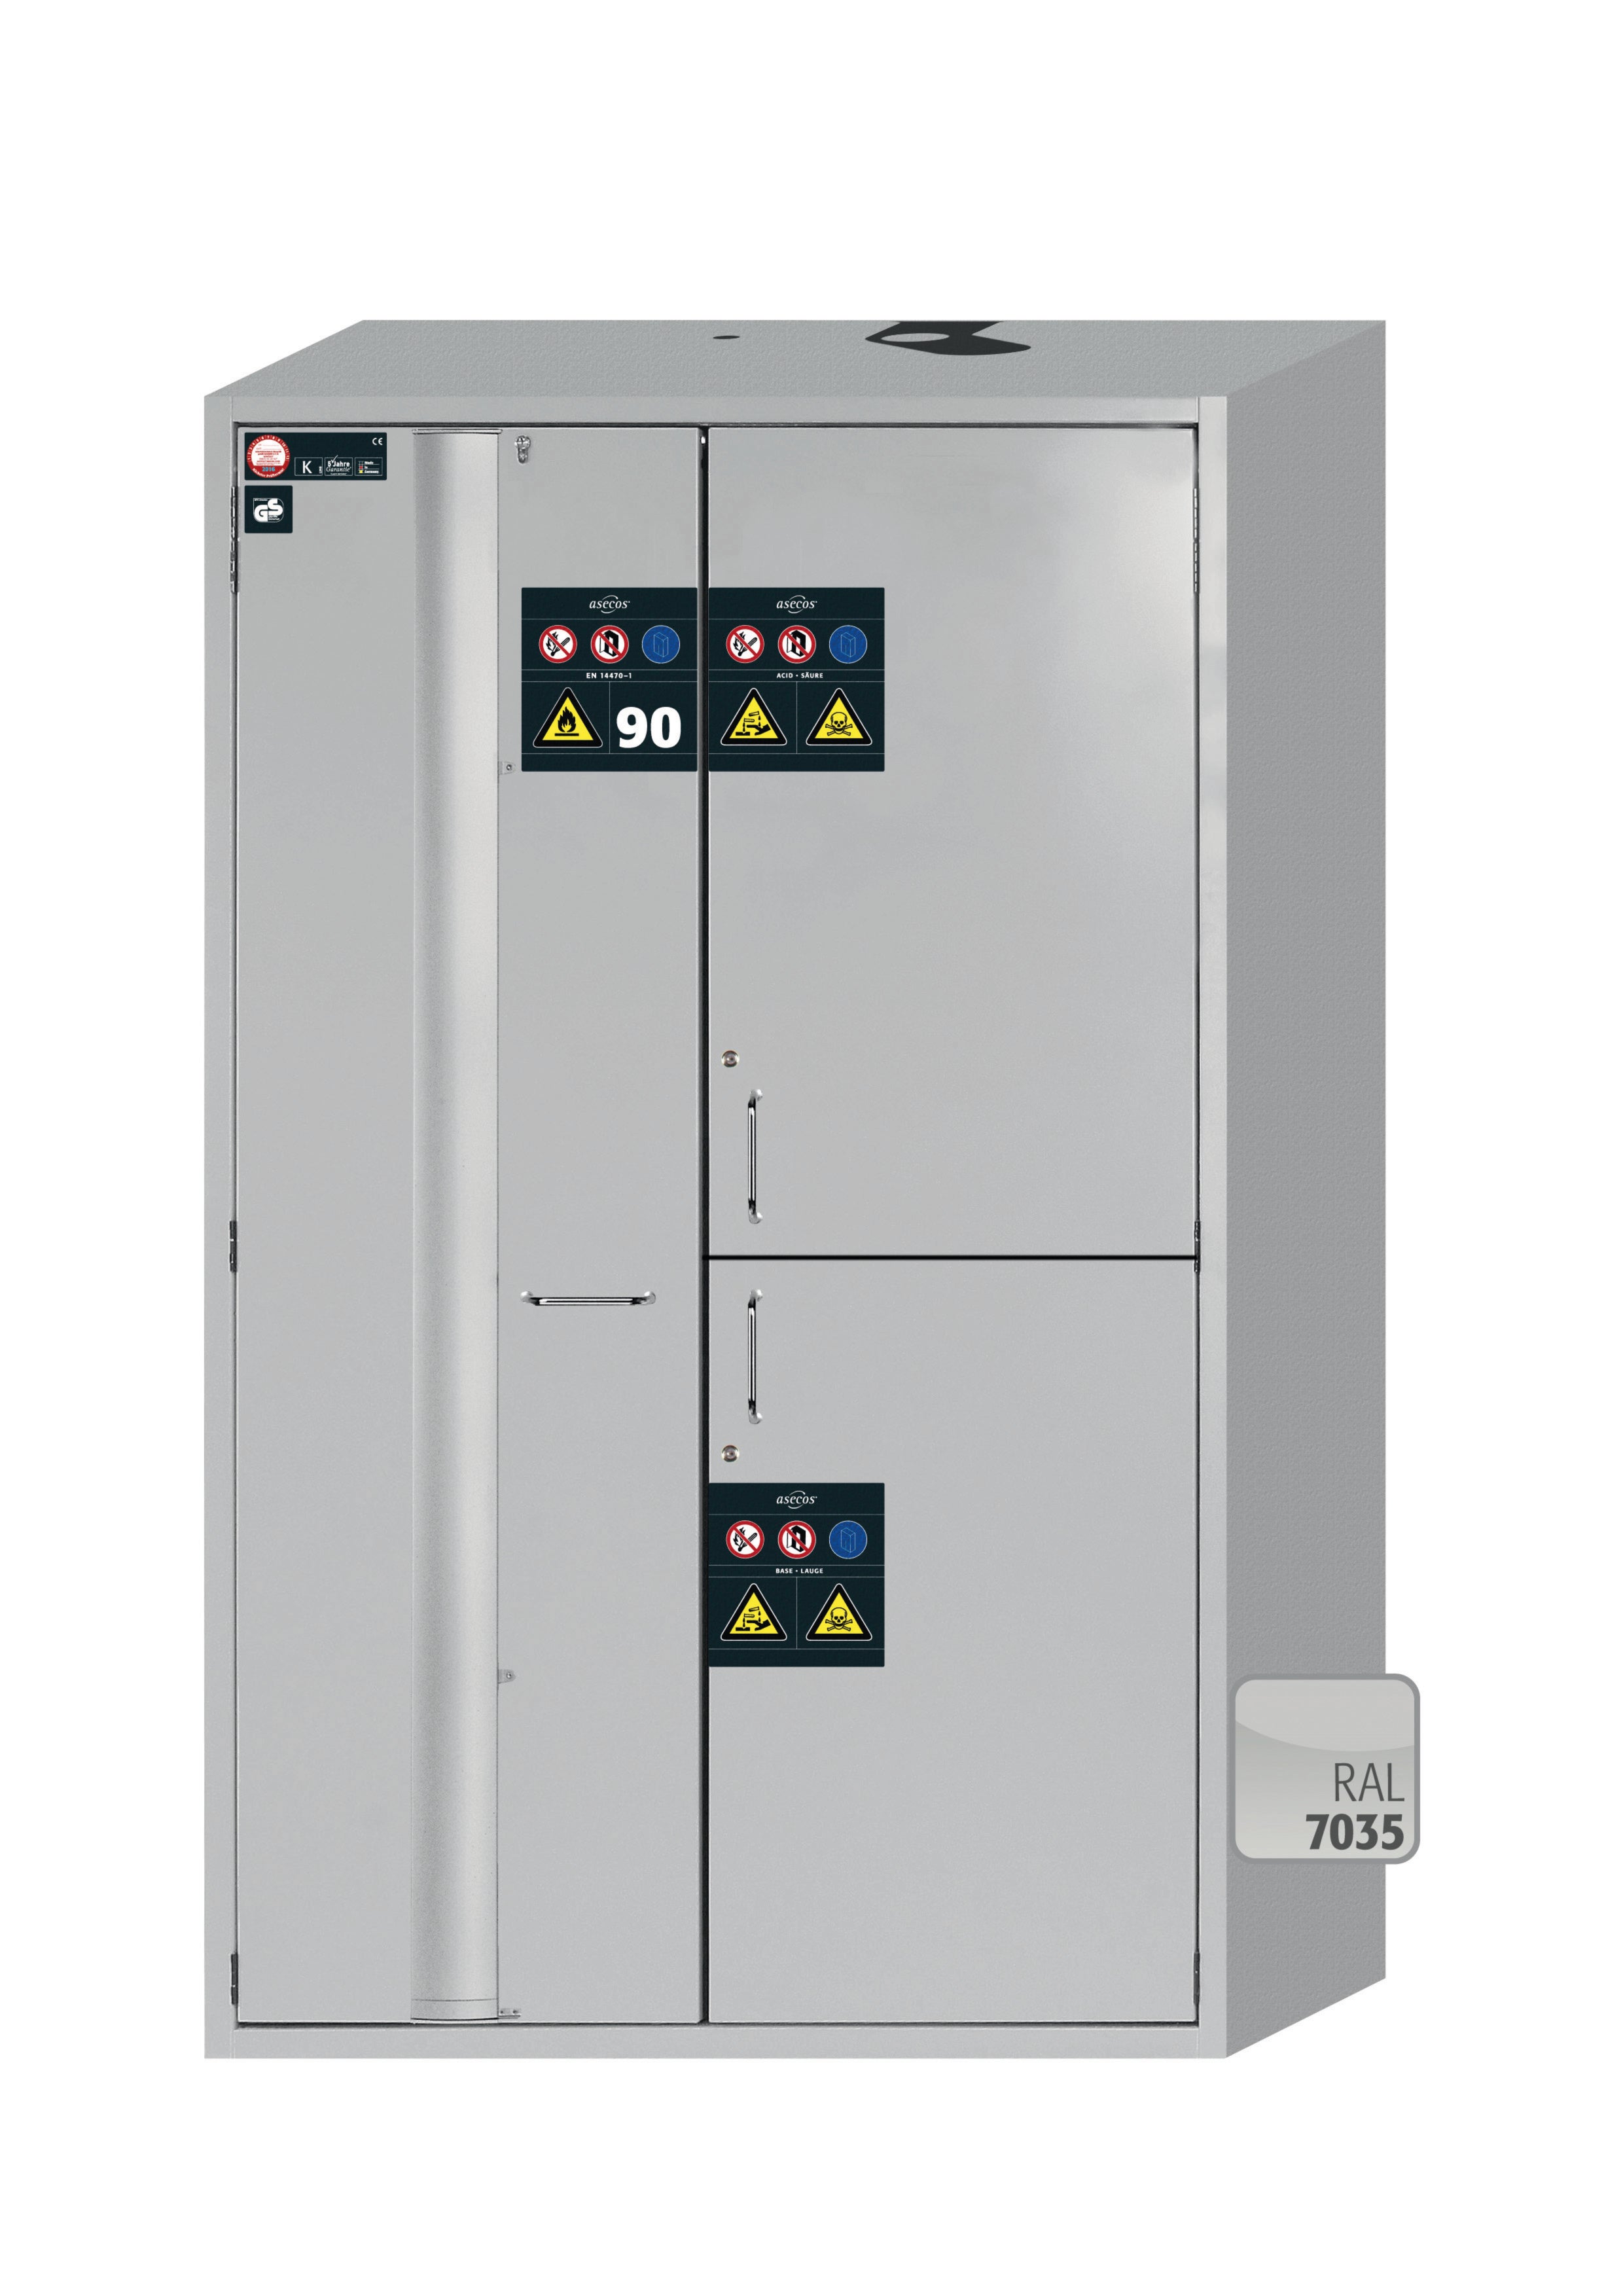 Type 90 combination safety cabinet K-PHOENIX Vol.2-90 model K90.196.120.MF.FWAC in light gray RAL 7035 with 3x standard tray base (sheet steel)